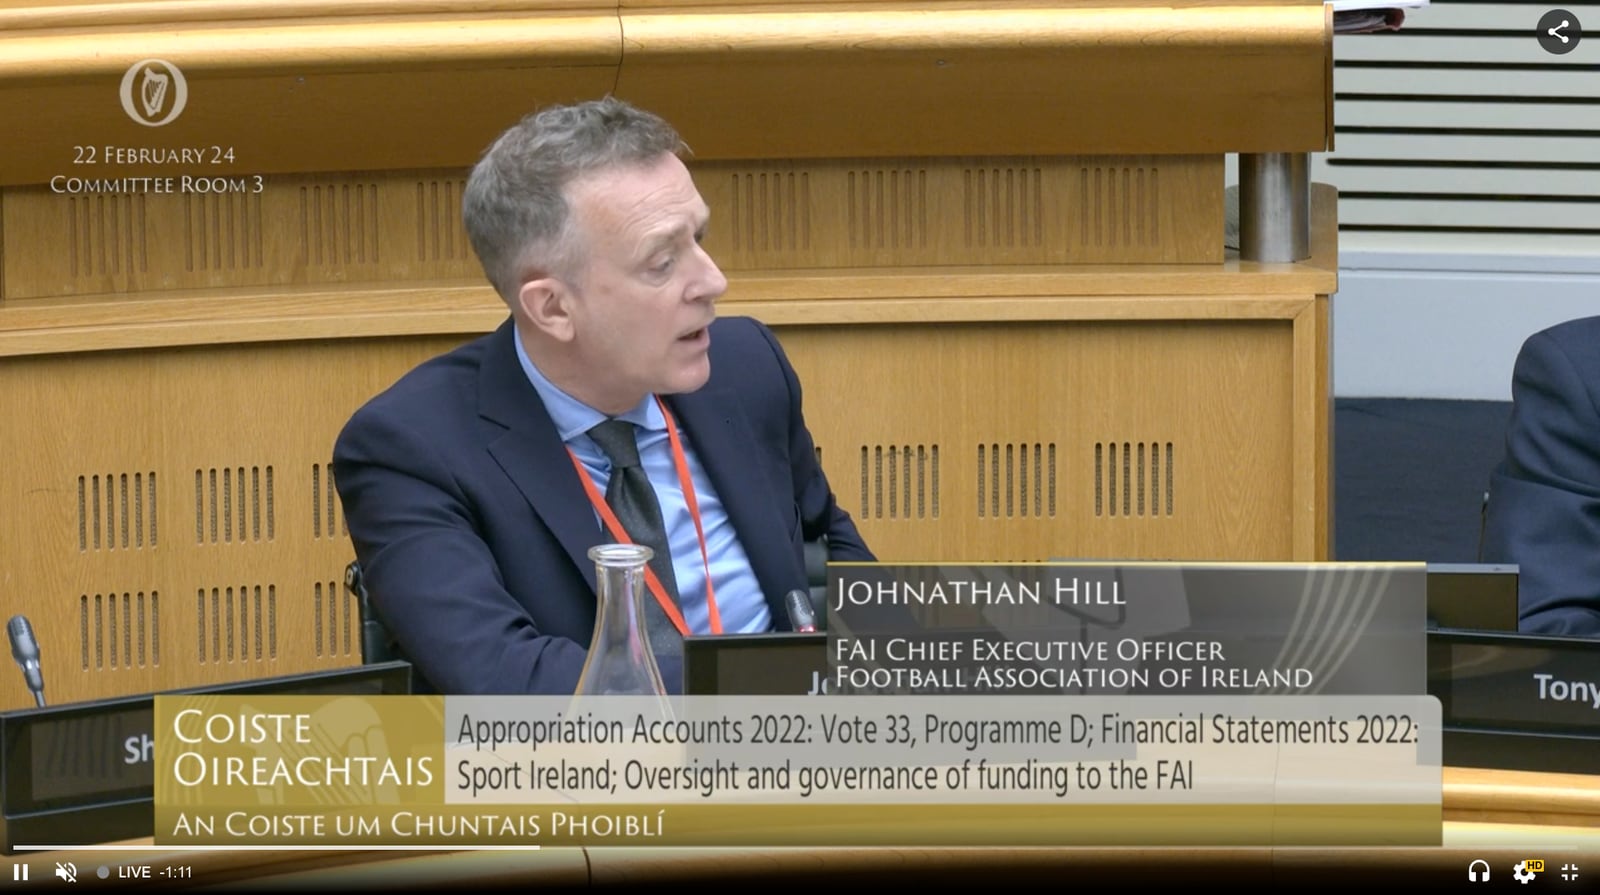 Members of the Football Association of Ireland (FAI) appear at the Public Accounts Committee (PAC) on Thursday, February 22nd, 2024